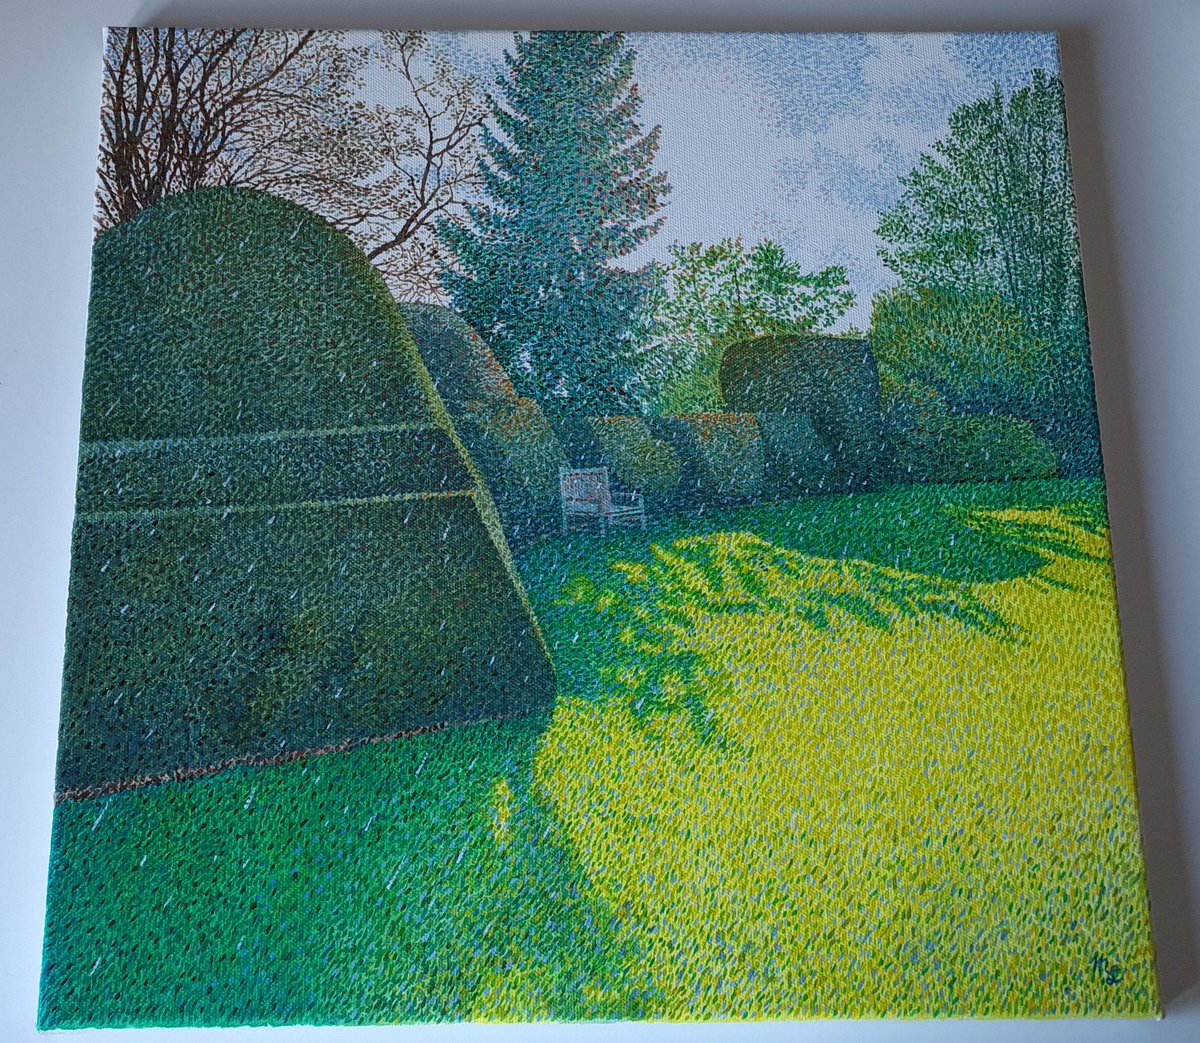 I added rain to the garden scene, the cold winter light and atmosphere was so good when I visited the location I could not resist keeping it there!

#gardenpainting #derbyshireartist  #gardentopiary #Nottinghamshire #holmepierrepont